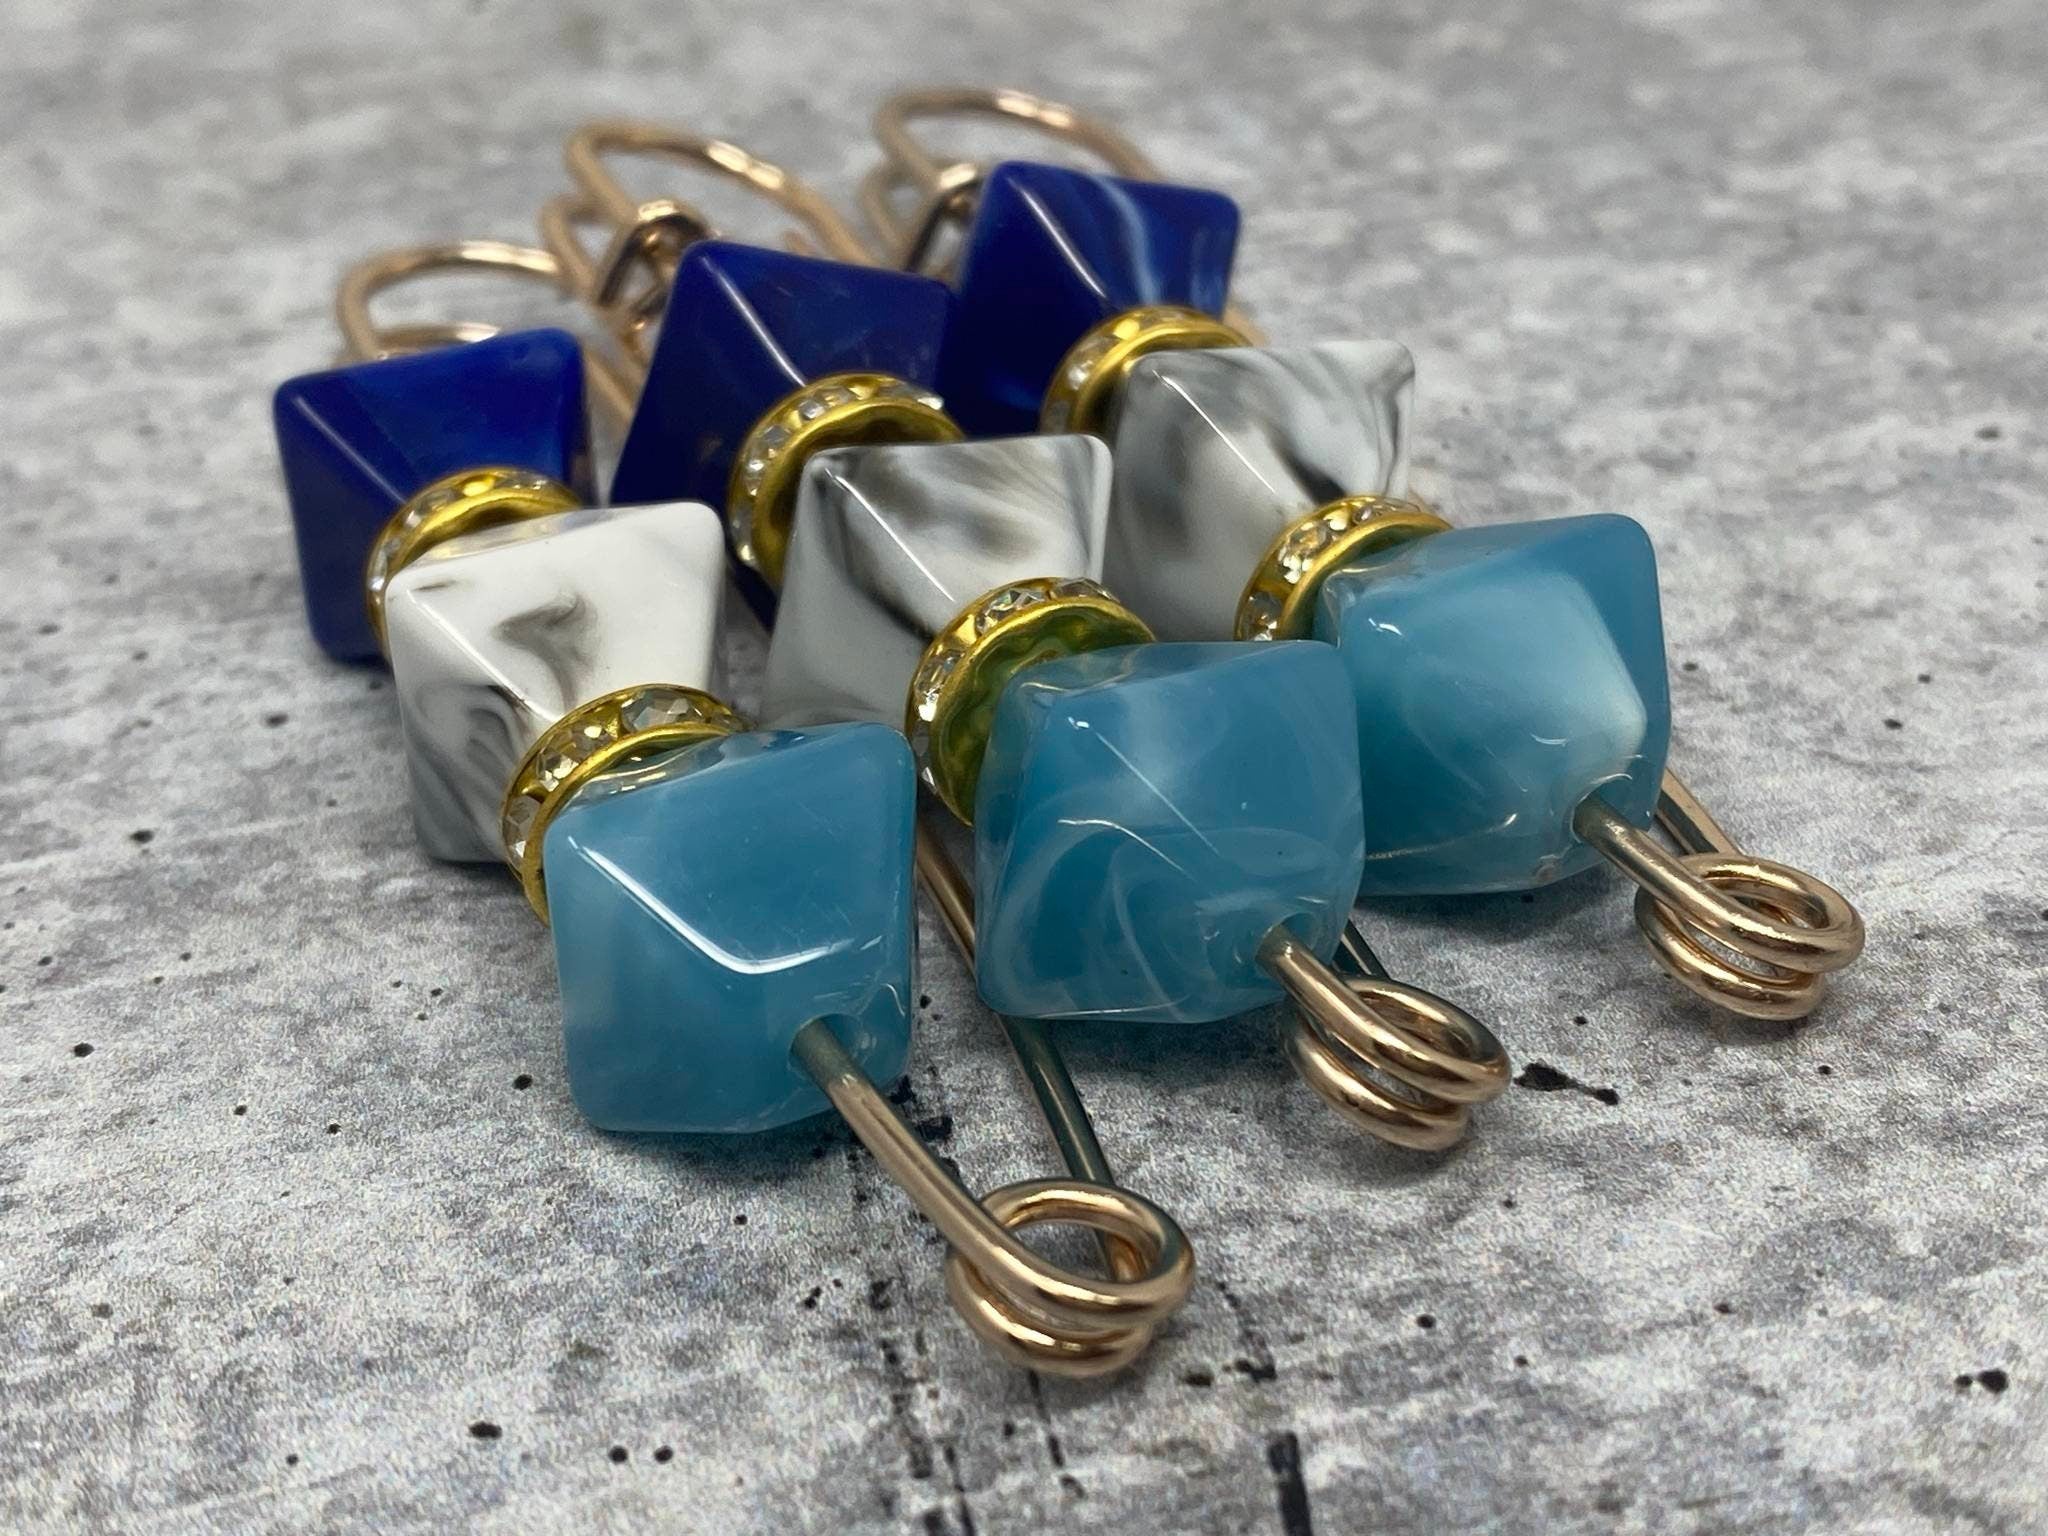 6-pc set, Shades of BLUE Resin Beads w/Gold Bling, Safety Pin